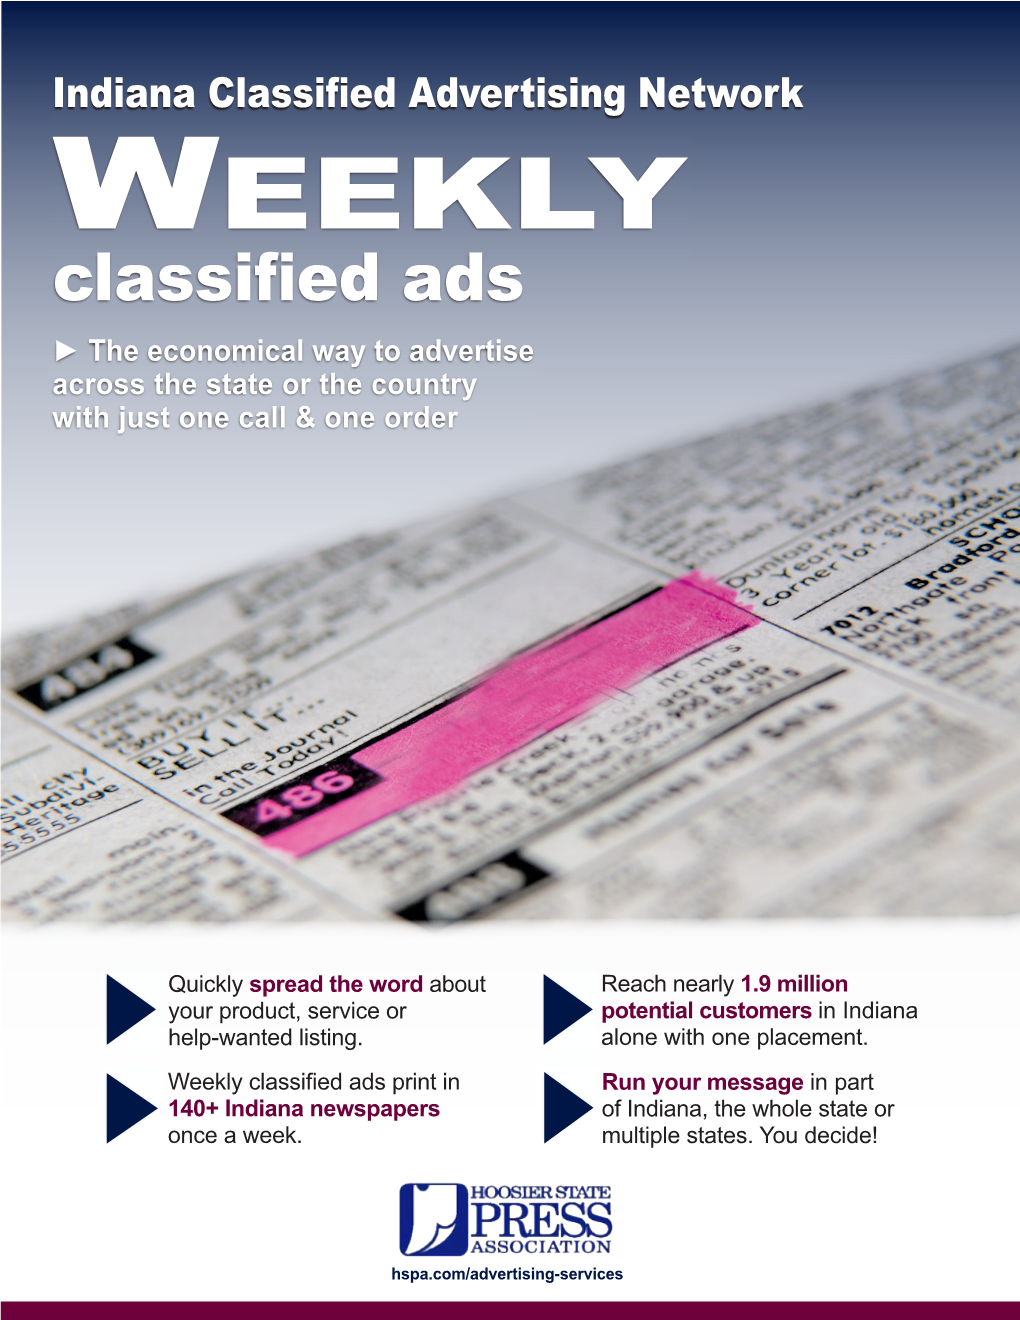 Weekly Classified Ads ► the Economical Way to Advertise Across the State Or the Country with Just One Call & One Order